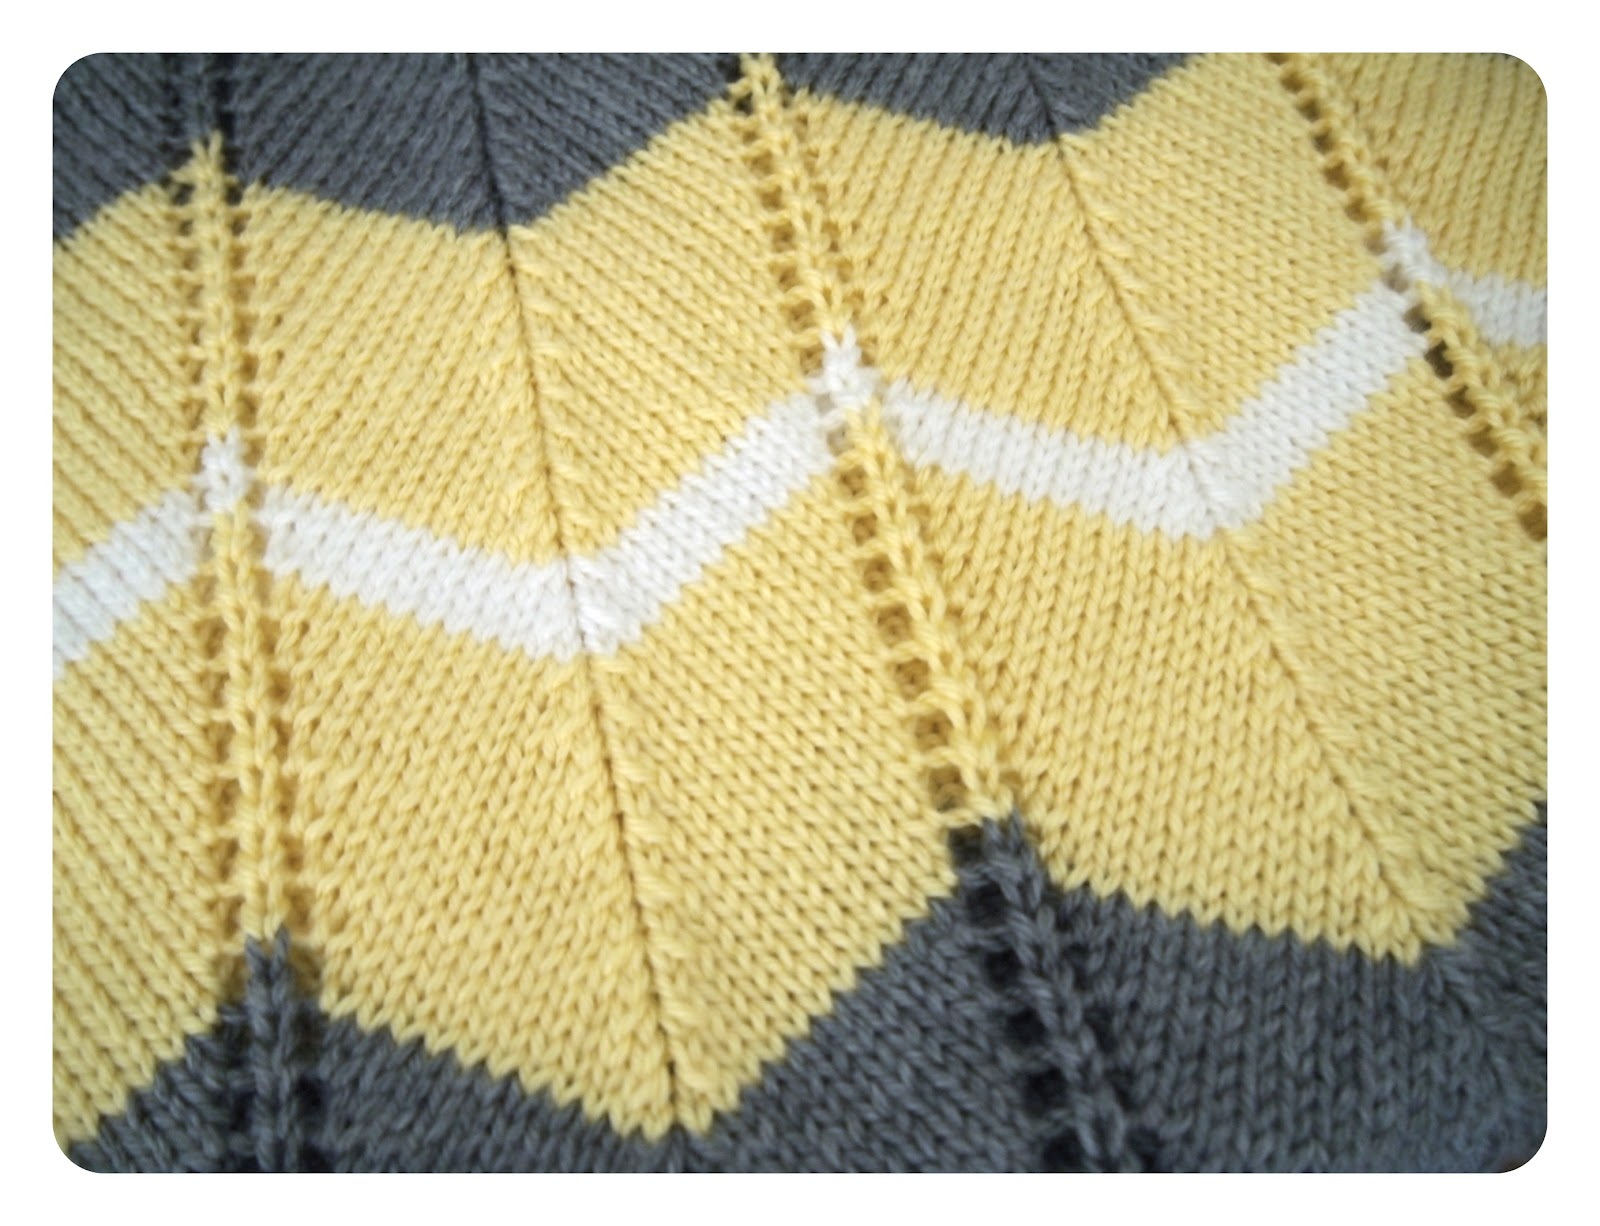 Knitting Patterns For Baby Blankets Free She Is Crafting My Doom Striped Chevron Ba Blanket Free